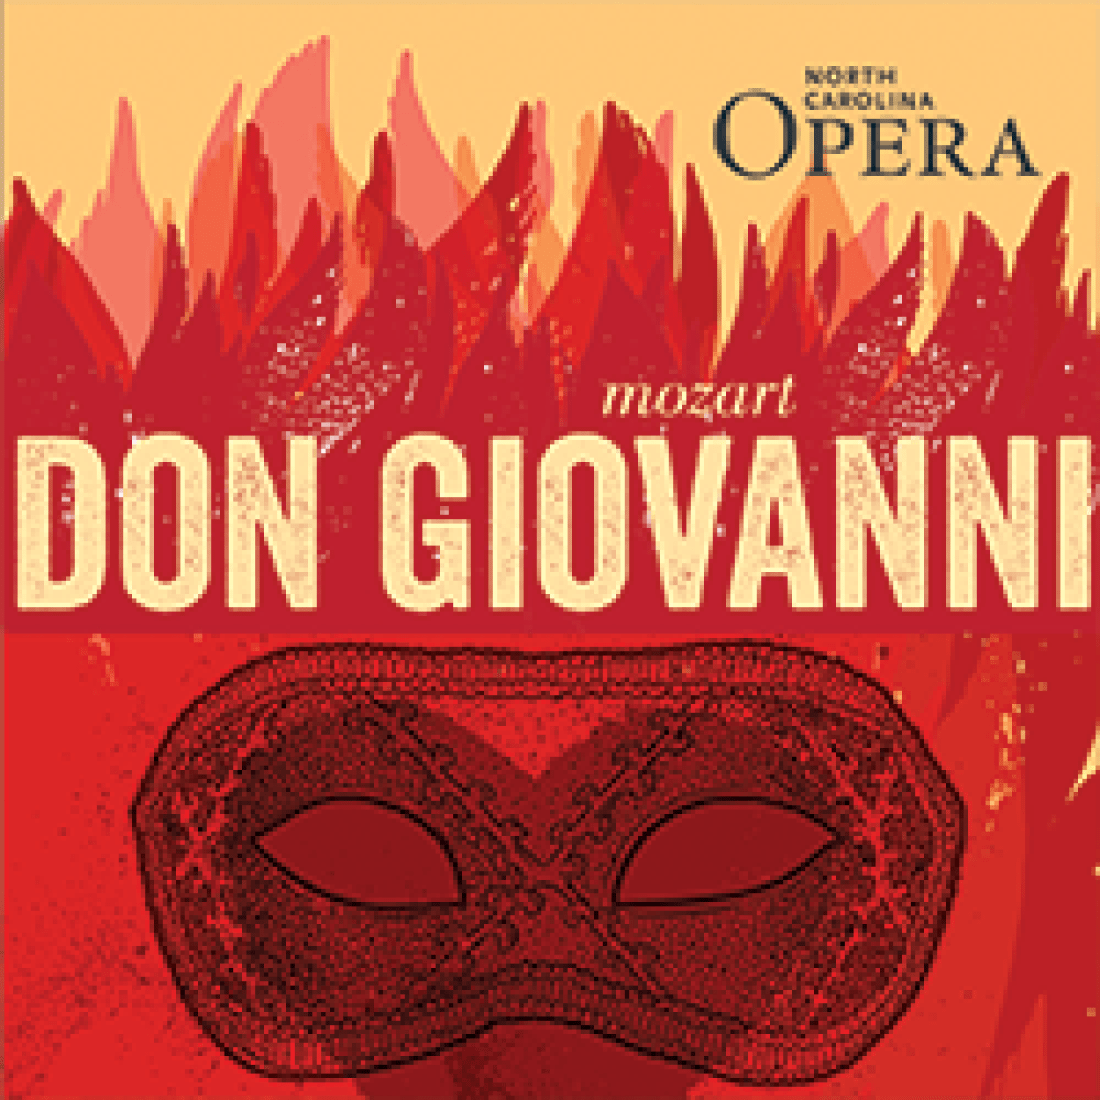 LLC square image for North Carolina Opera Don Giovanni show with red flames and black face mask outline